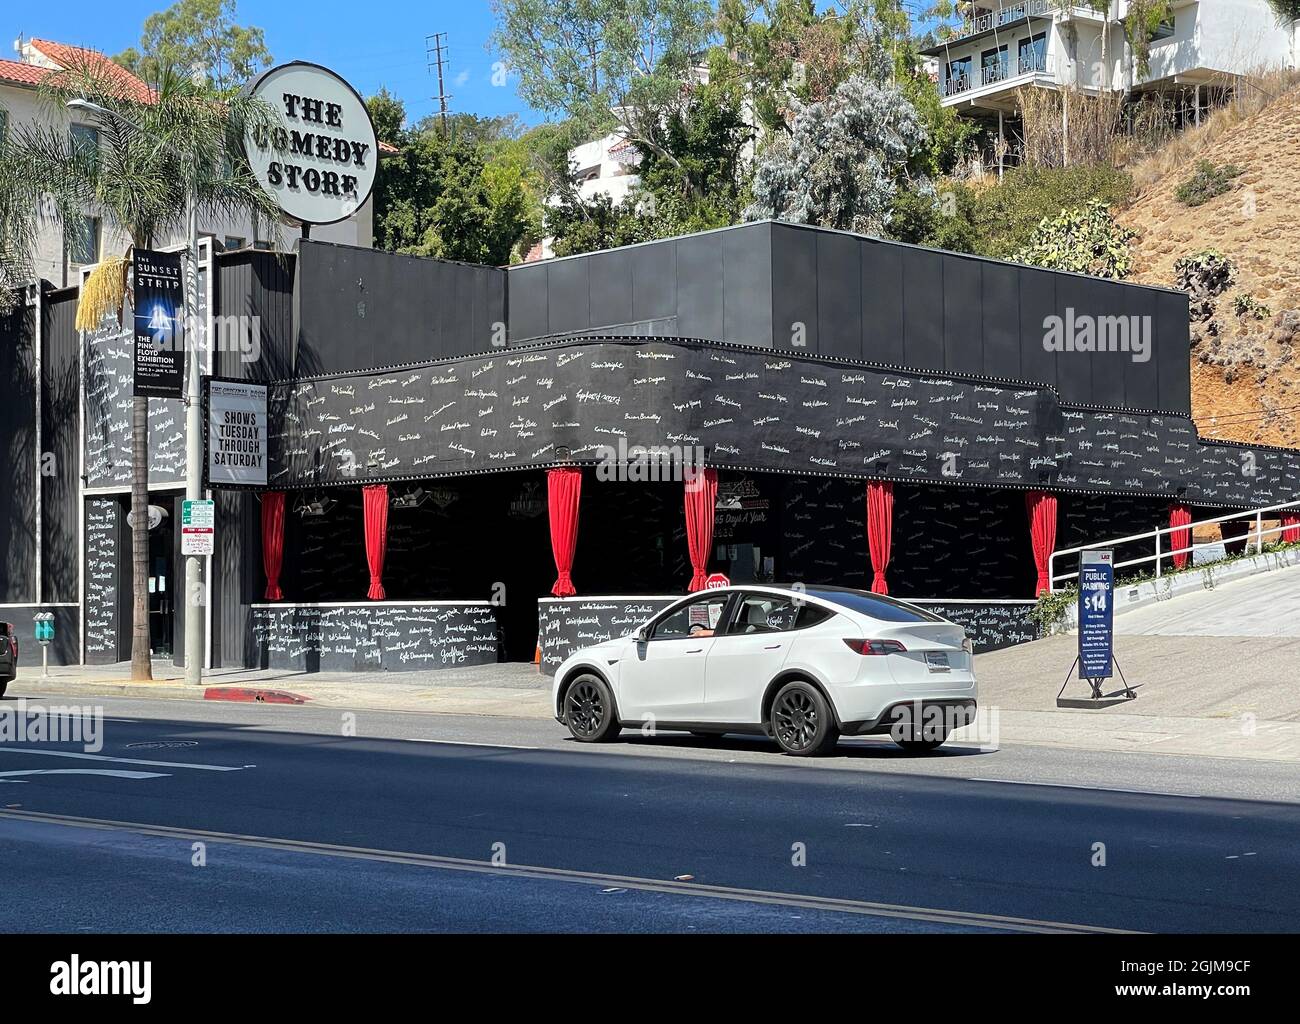 The Comedy Store, once the reknowned nightclub Ciro's, on the Sunset Strip in Los Angeles, CA Stock Photo